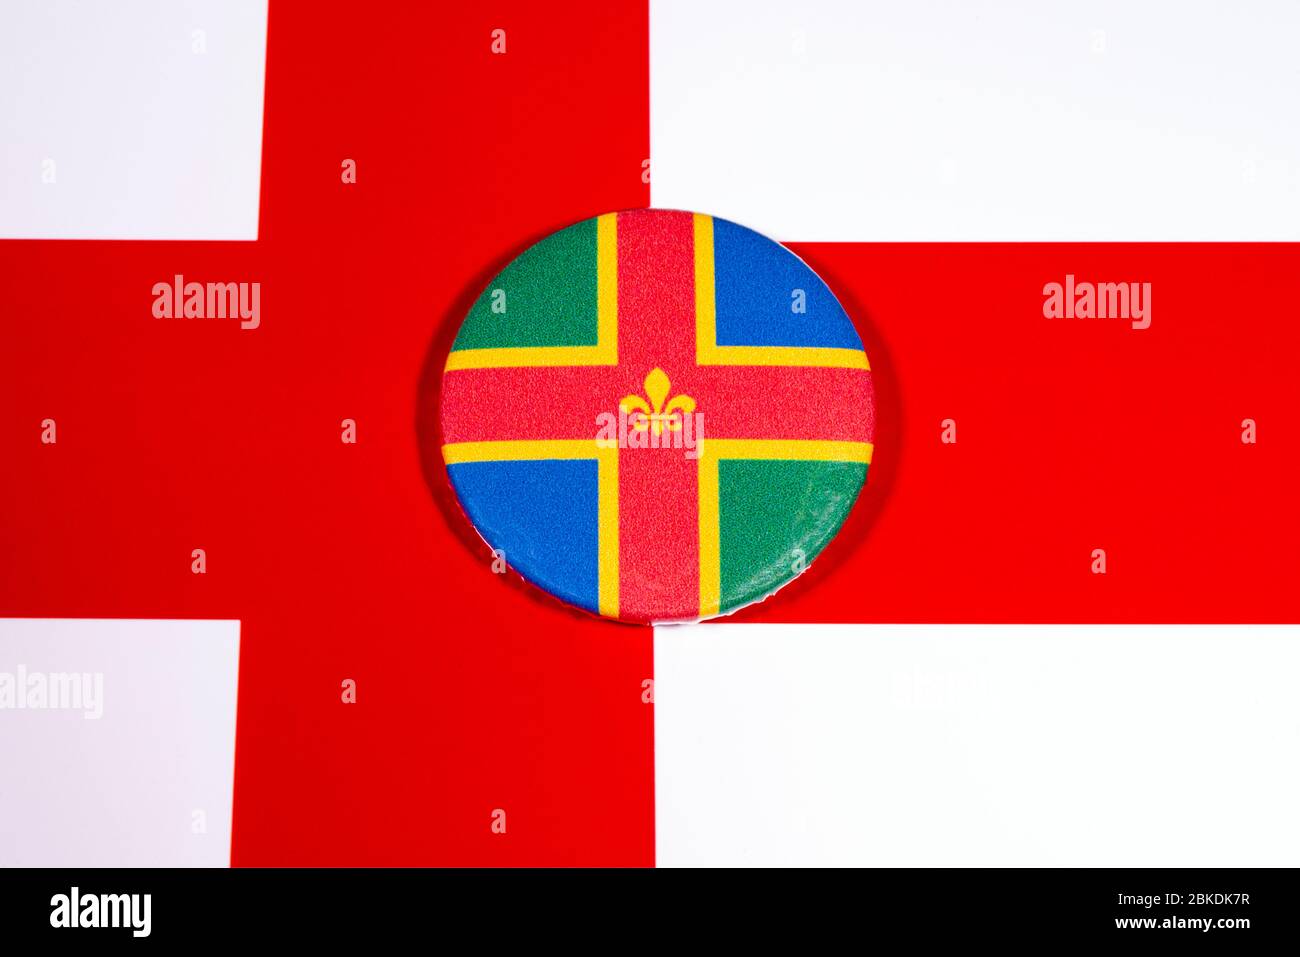 A badge portraying the flag of the English county of Lincolnshire, pictured over the England flag. Stock Photo